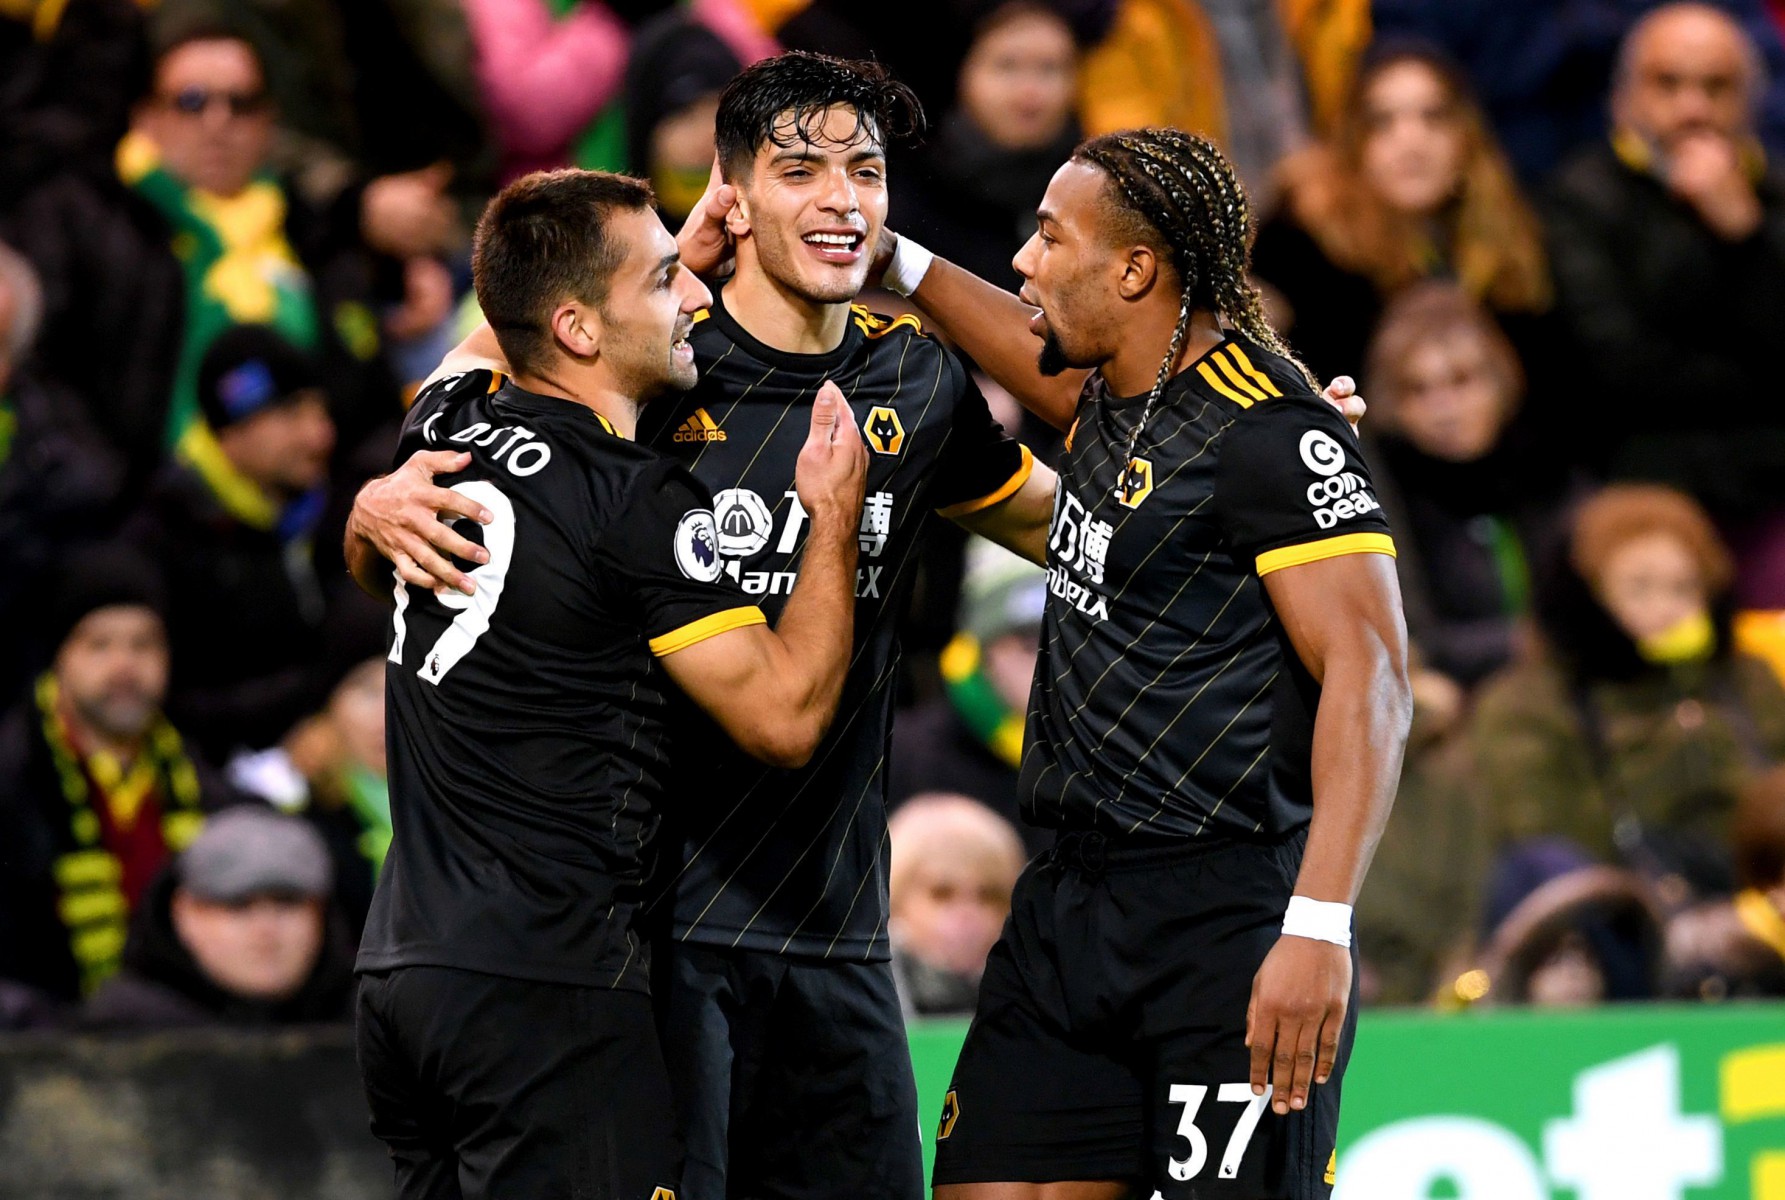 Wolves fought back from behind to claim all three points away at Norwich